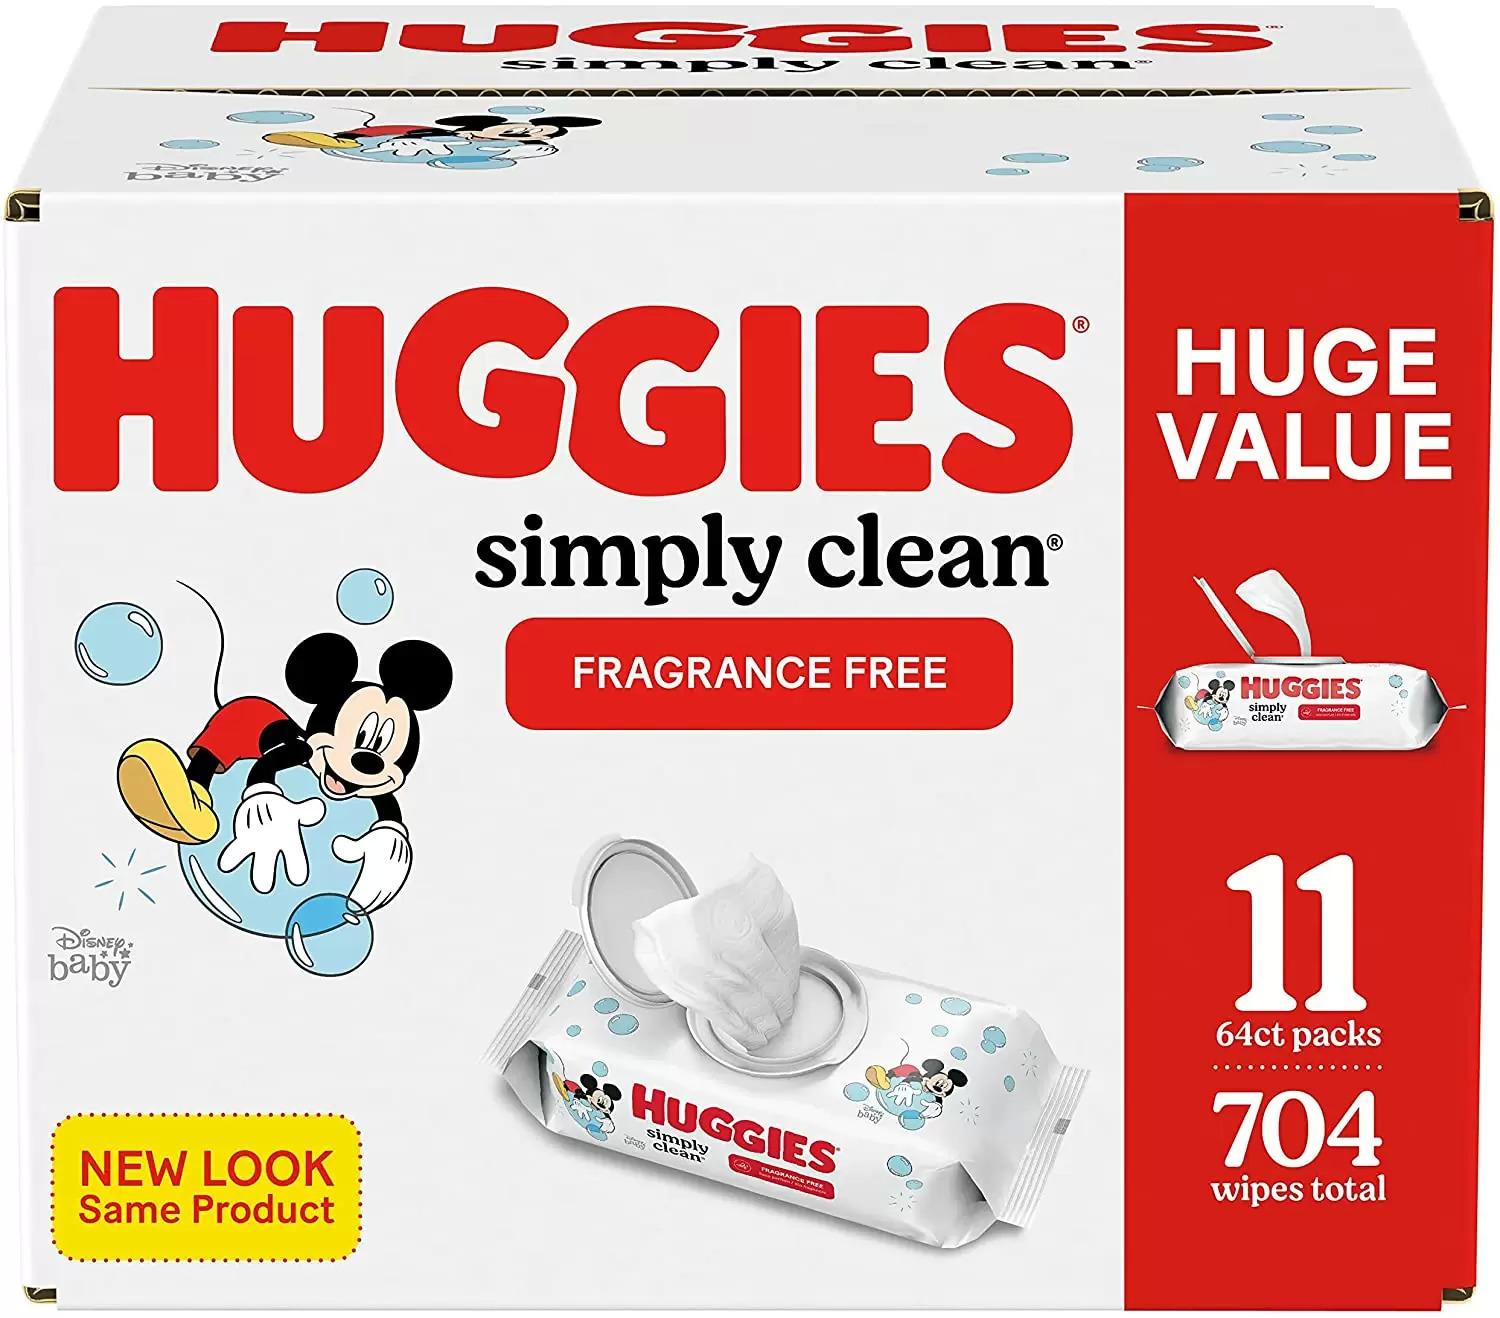 704 Huggies Simply Clean Baby Diaper Wipes for $11.95 Shipped